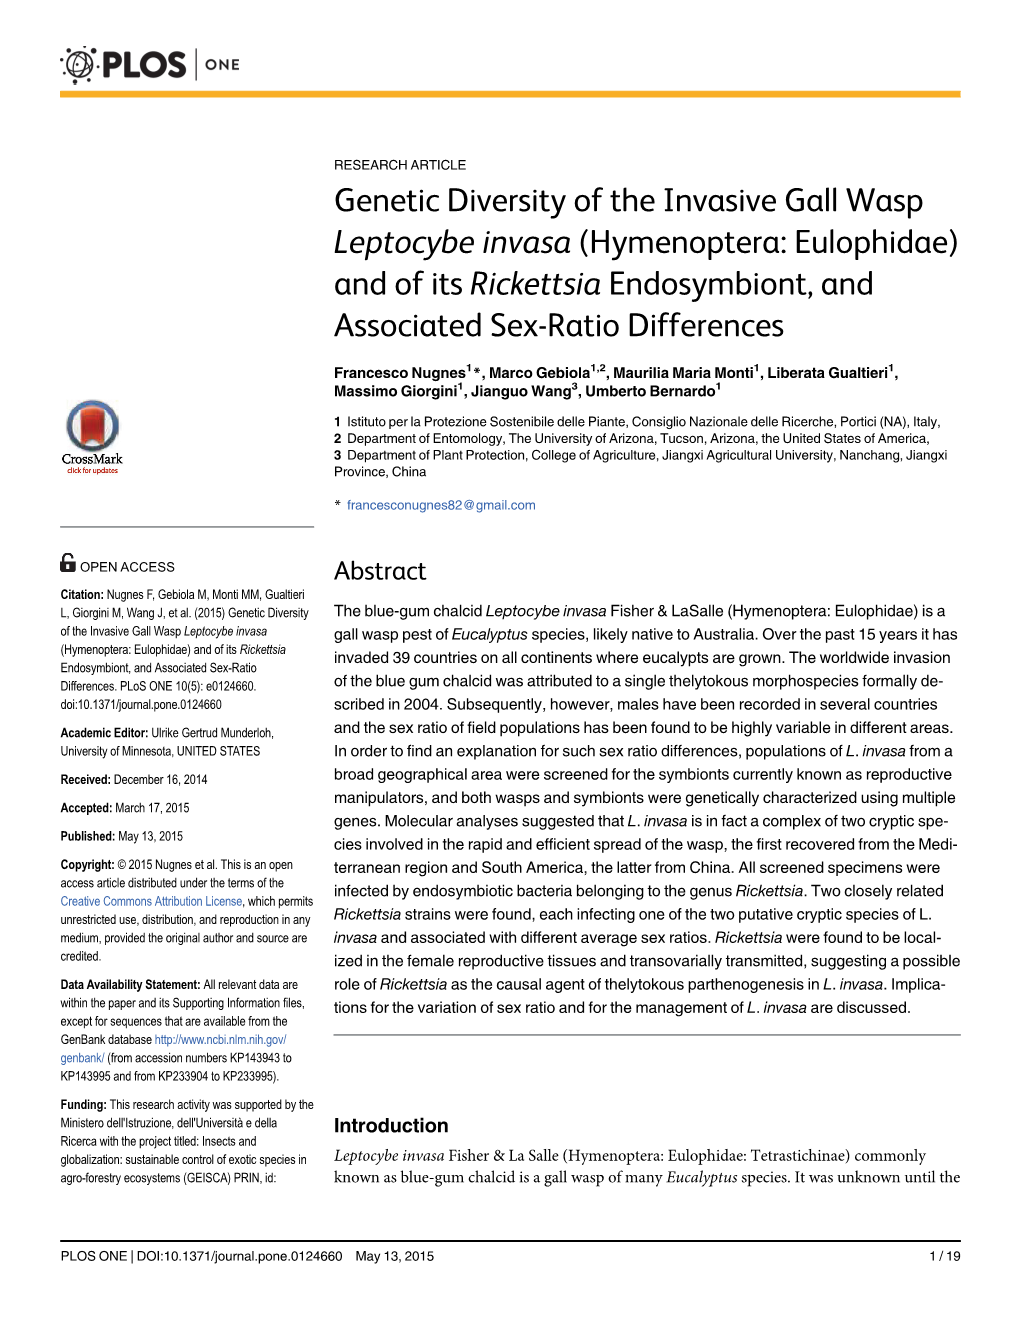 Genetic Diversity of the Invasive Gall Wasp Leptocybe Invasa (Hymenoptera: Eulophidae) and of Its Rickettsia Endosymbiont, and Associated Sex-Ratio Differences